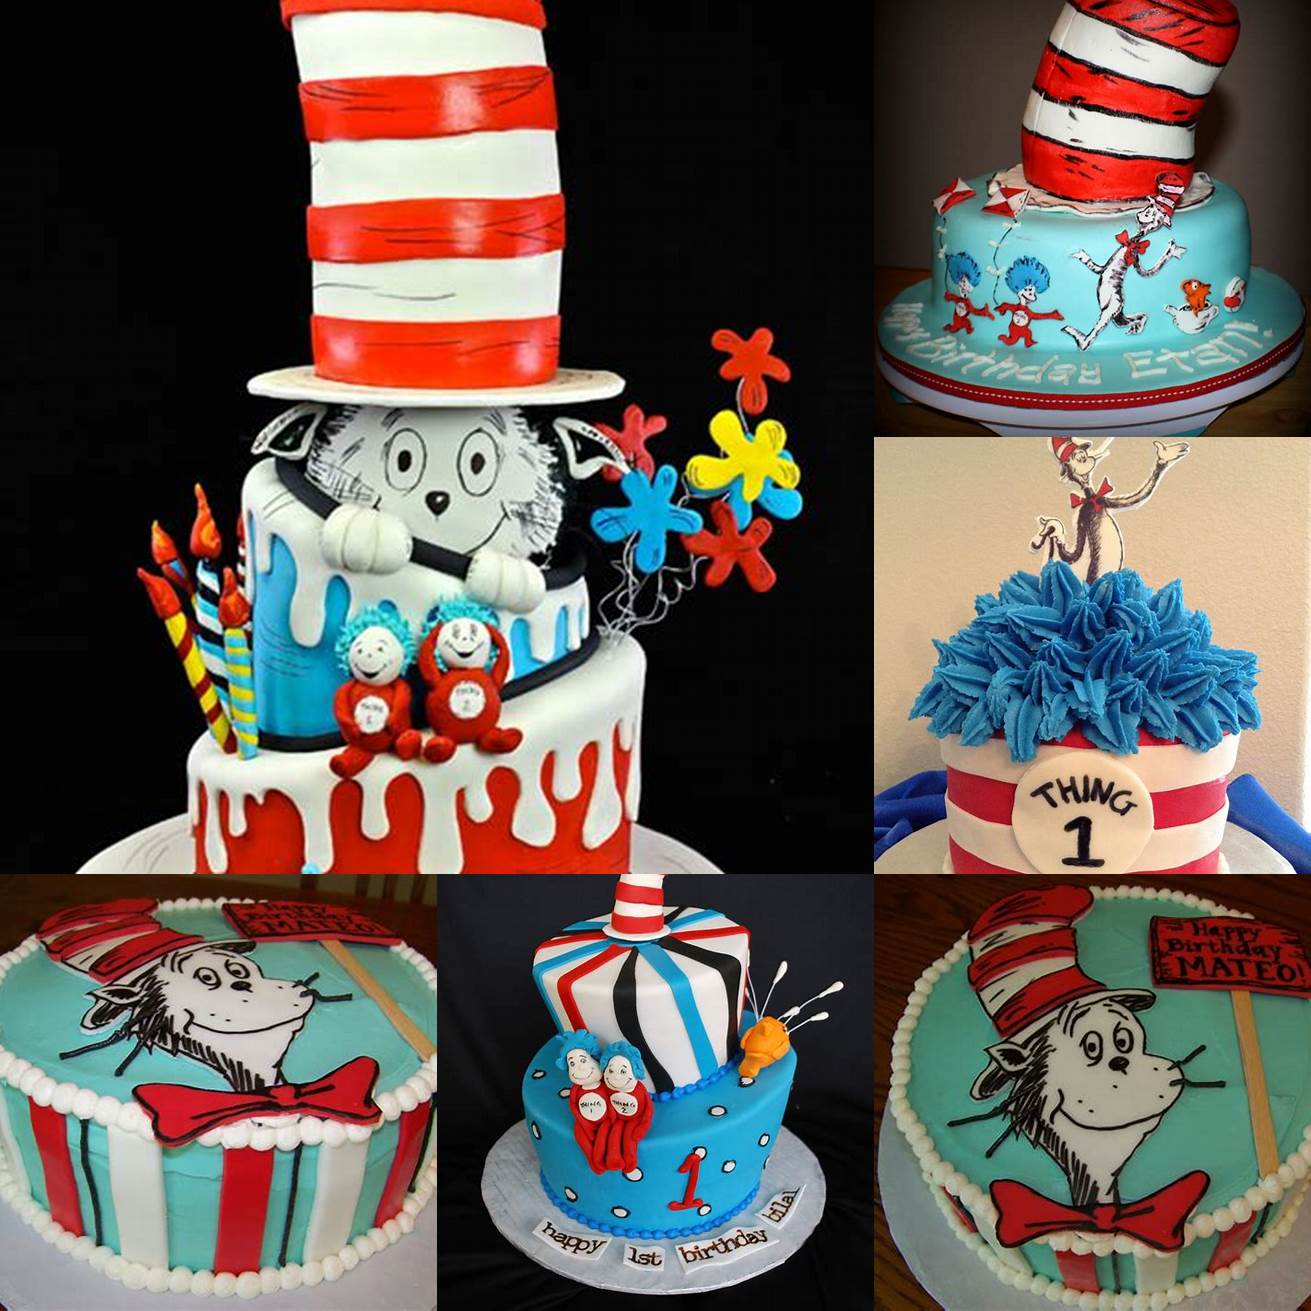 The Cat in the Hat Cake